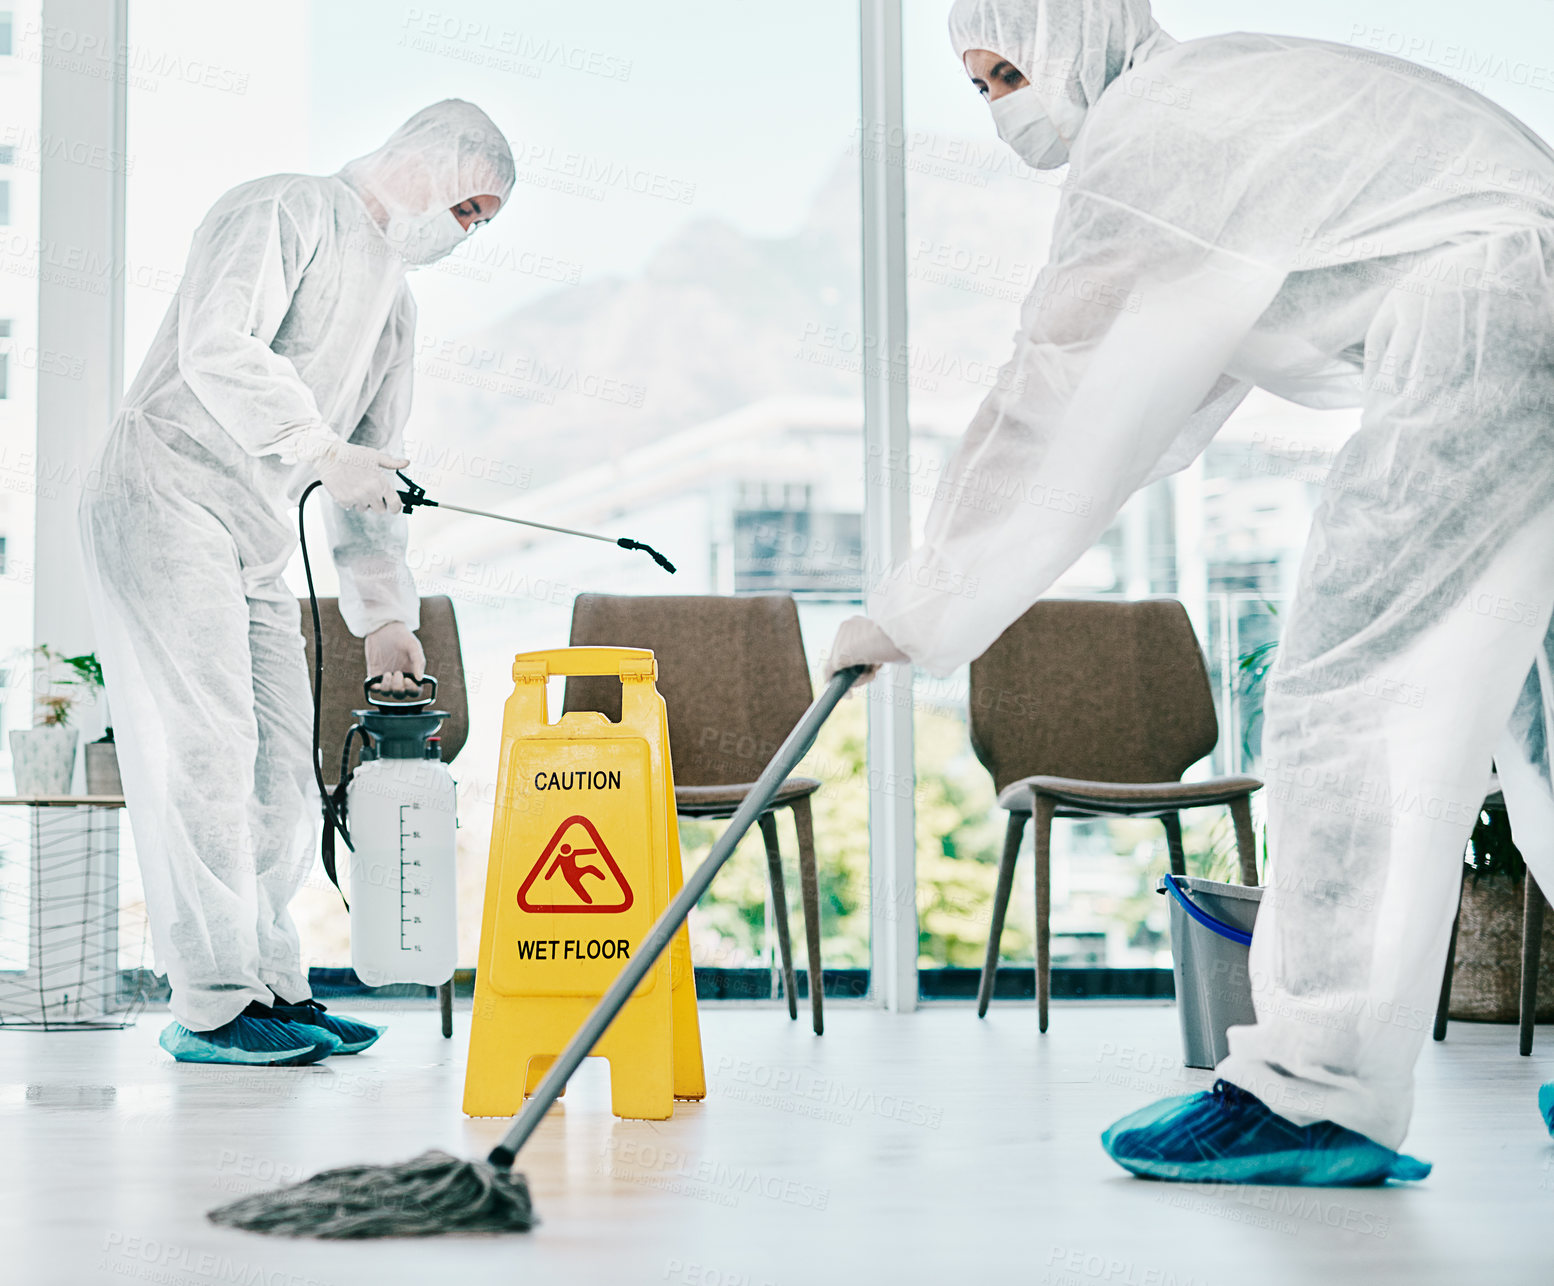 Buy stock photo Shot of healthcare workers wearing hazmat suits and sanitising a room during an outbreak